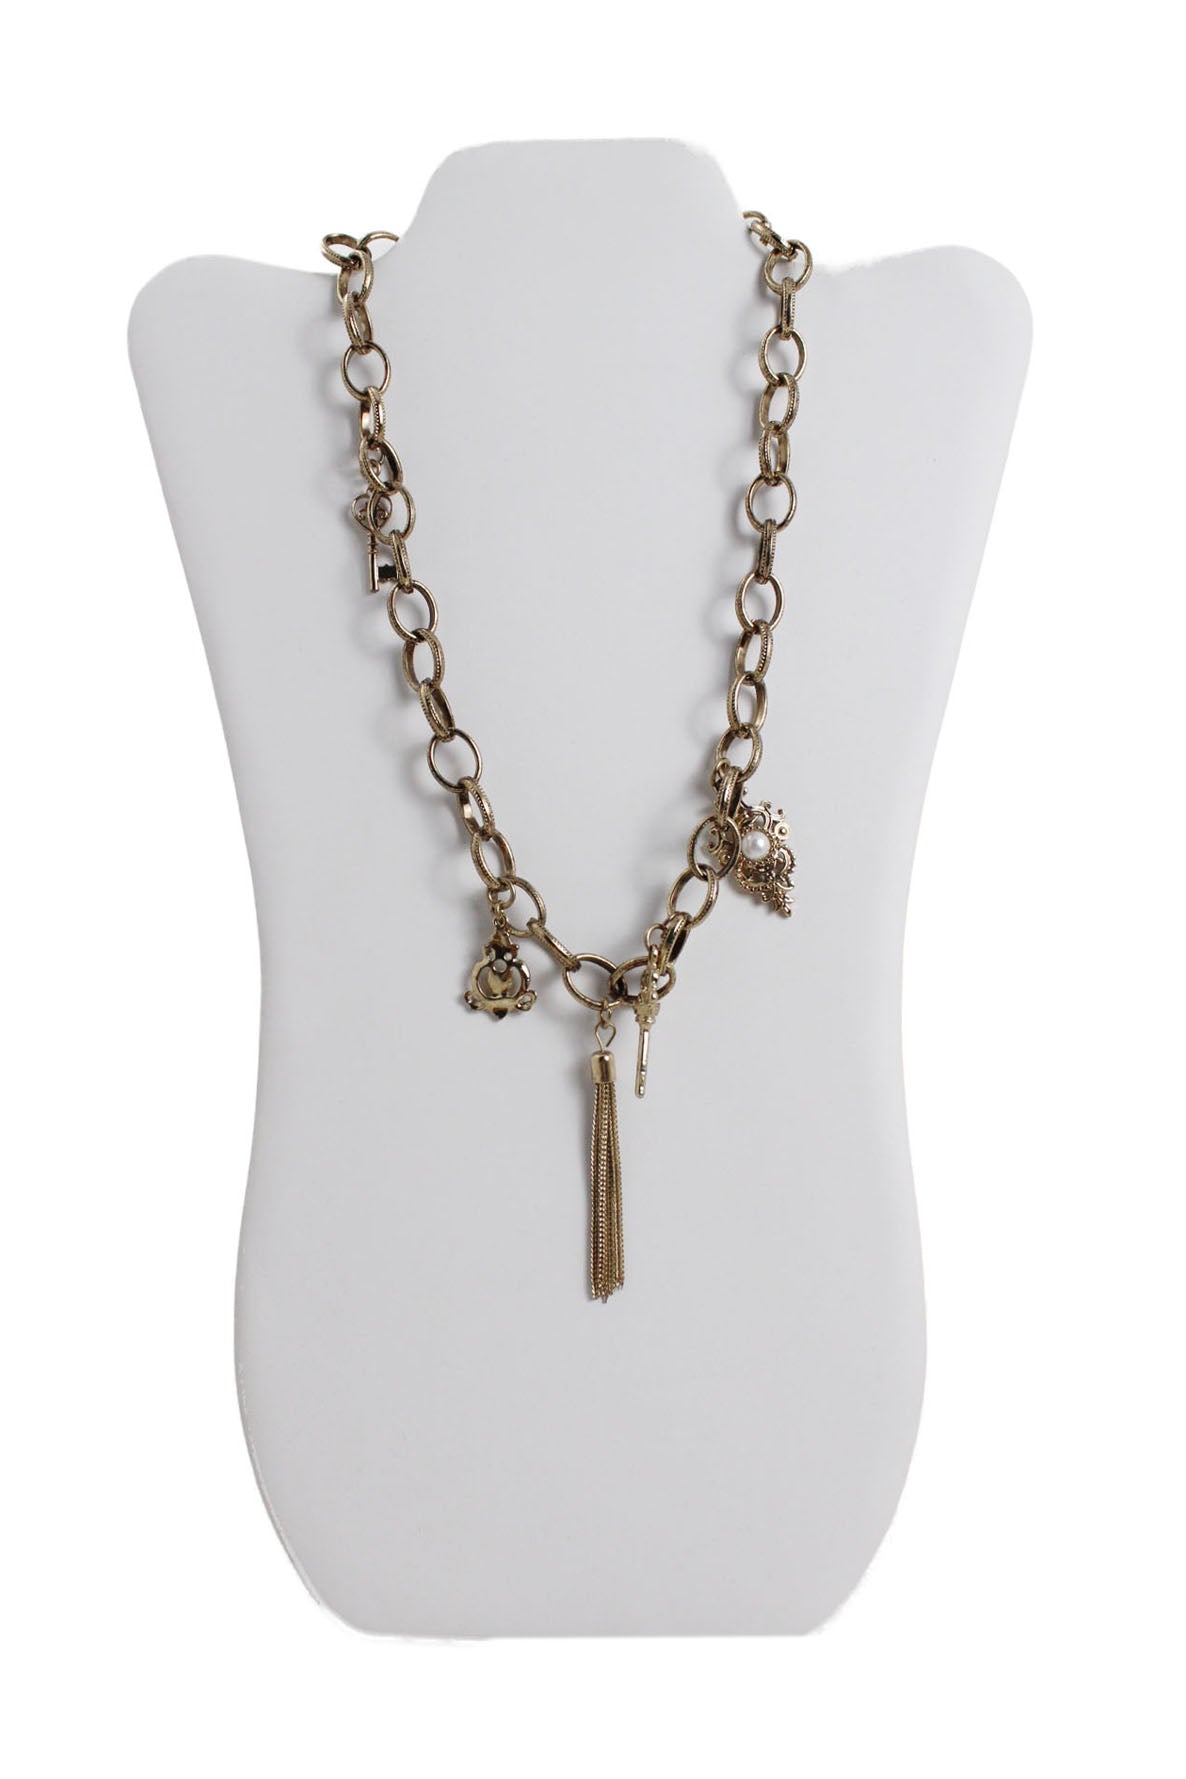 front of vintage gold toned chain link necklace. features multiple  keys/ tassel/abstract charms, and maxi spring ring closure.